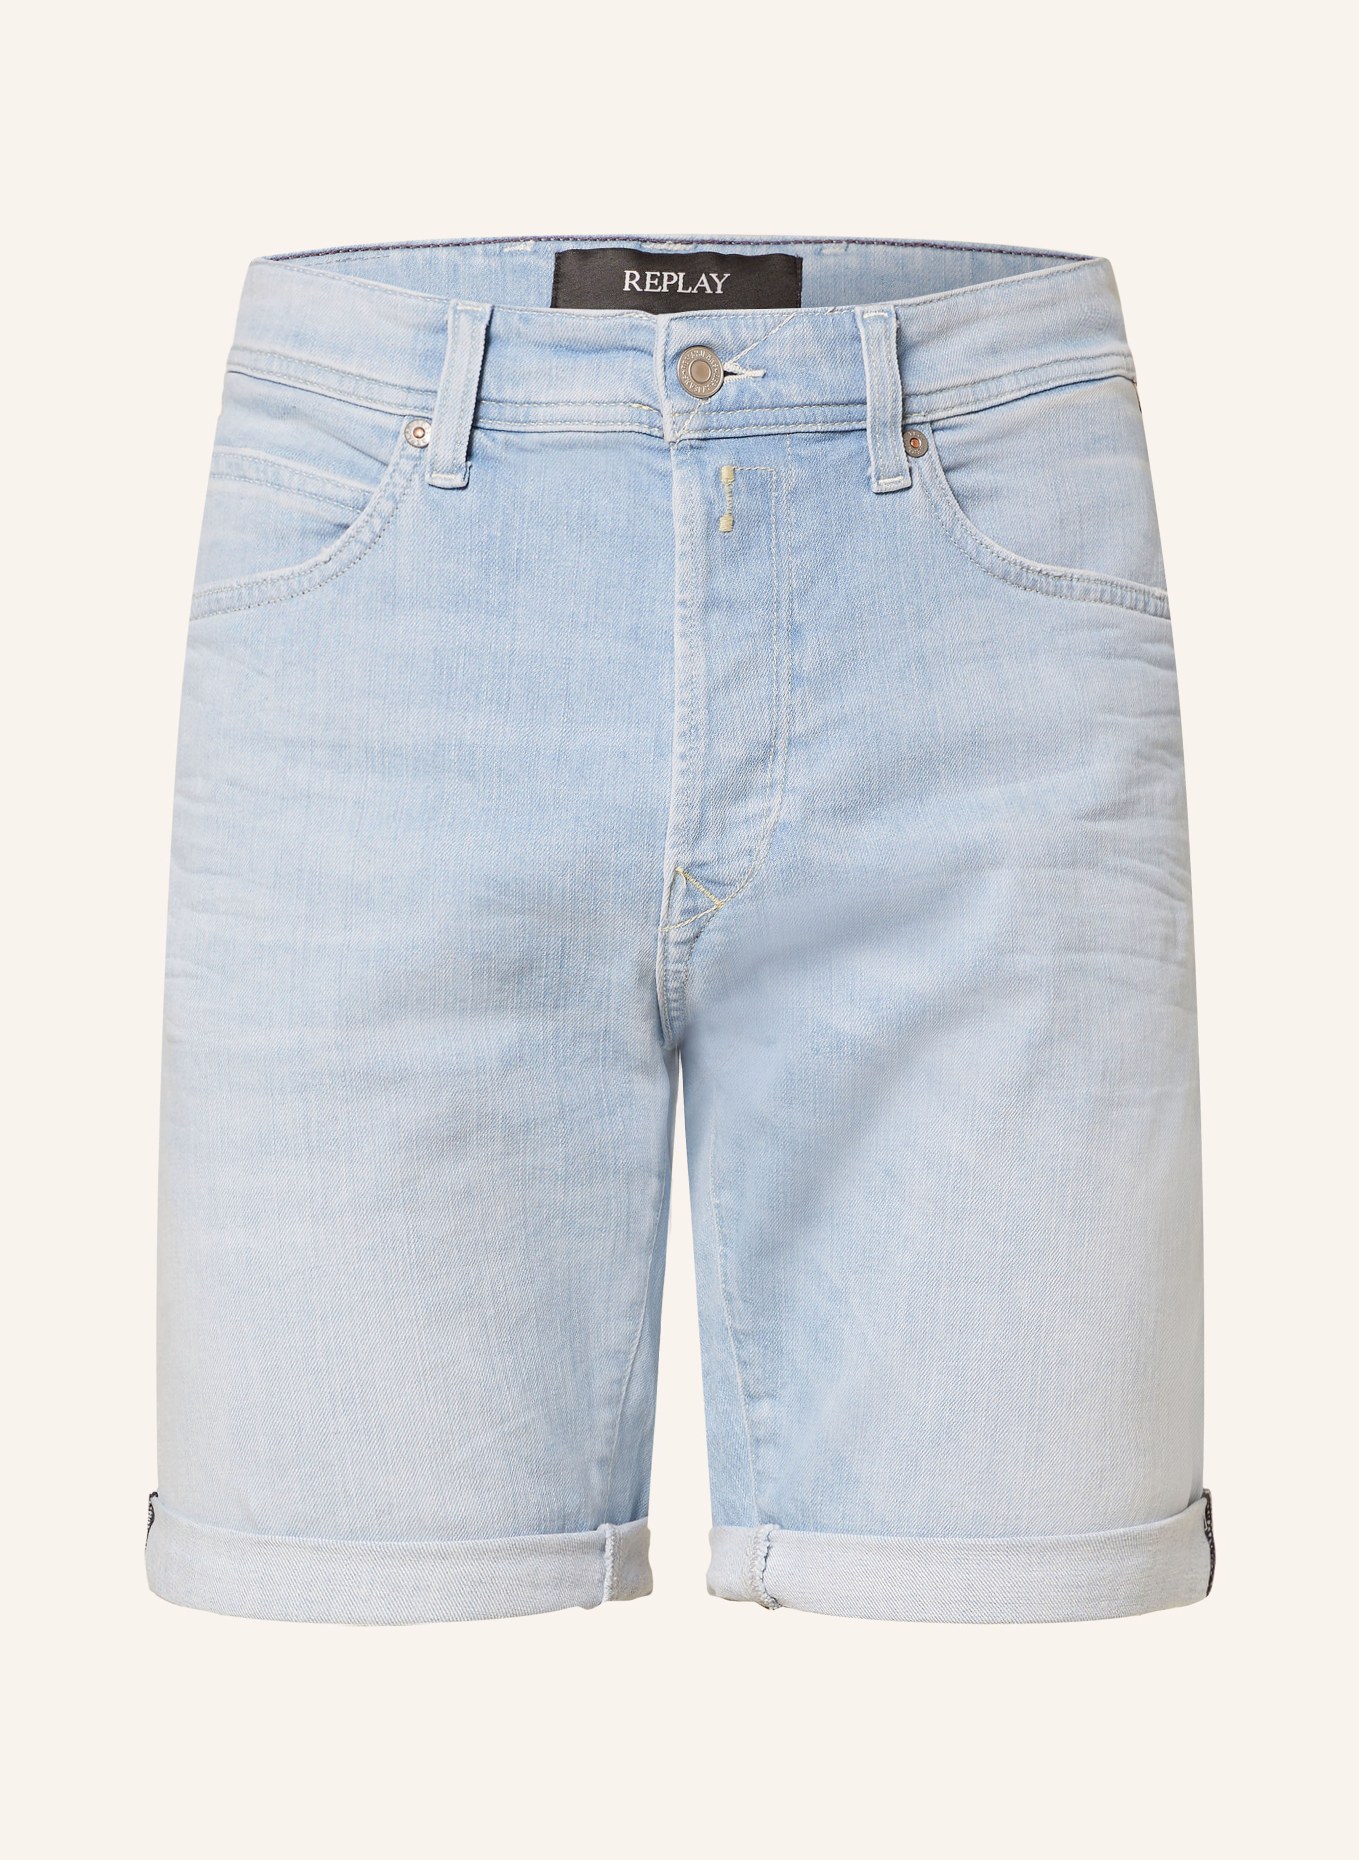 REPLAY Denim shorts 573 tapered fit, Color: 010 LIGHT BLUE (Image 1)